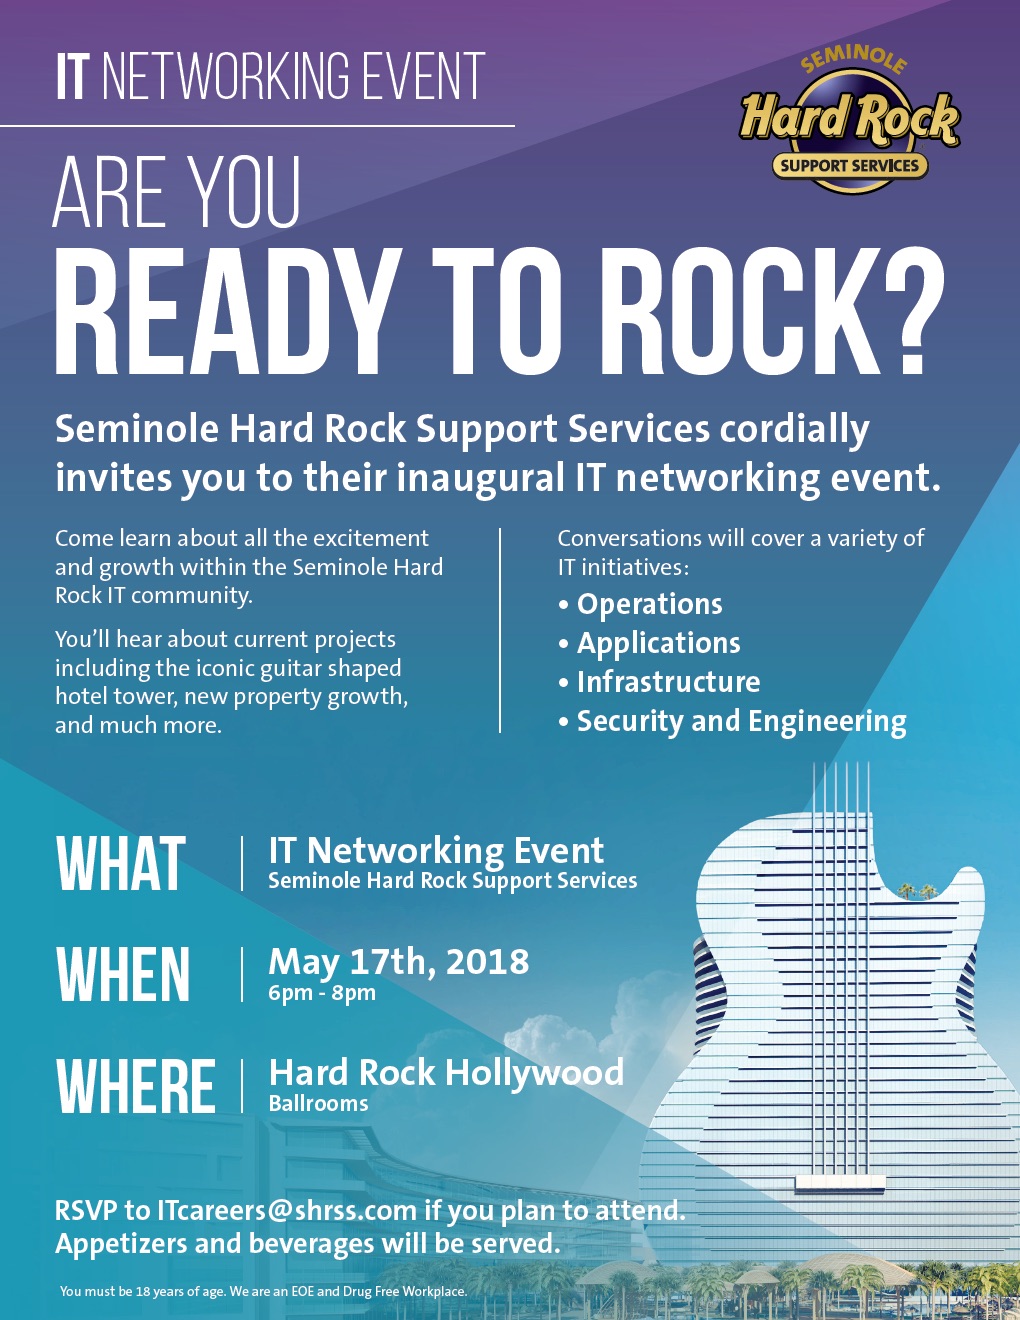 Are You ‘READY TO ROCK?’ – Seminole Hard Rock IT Networking Event